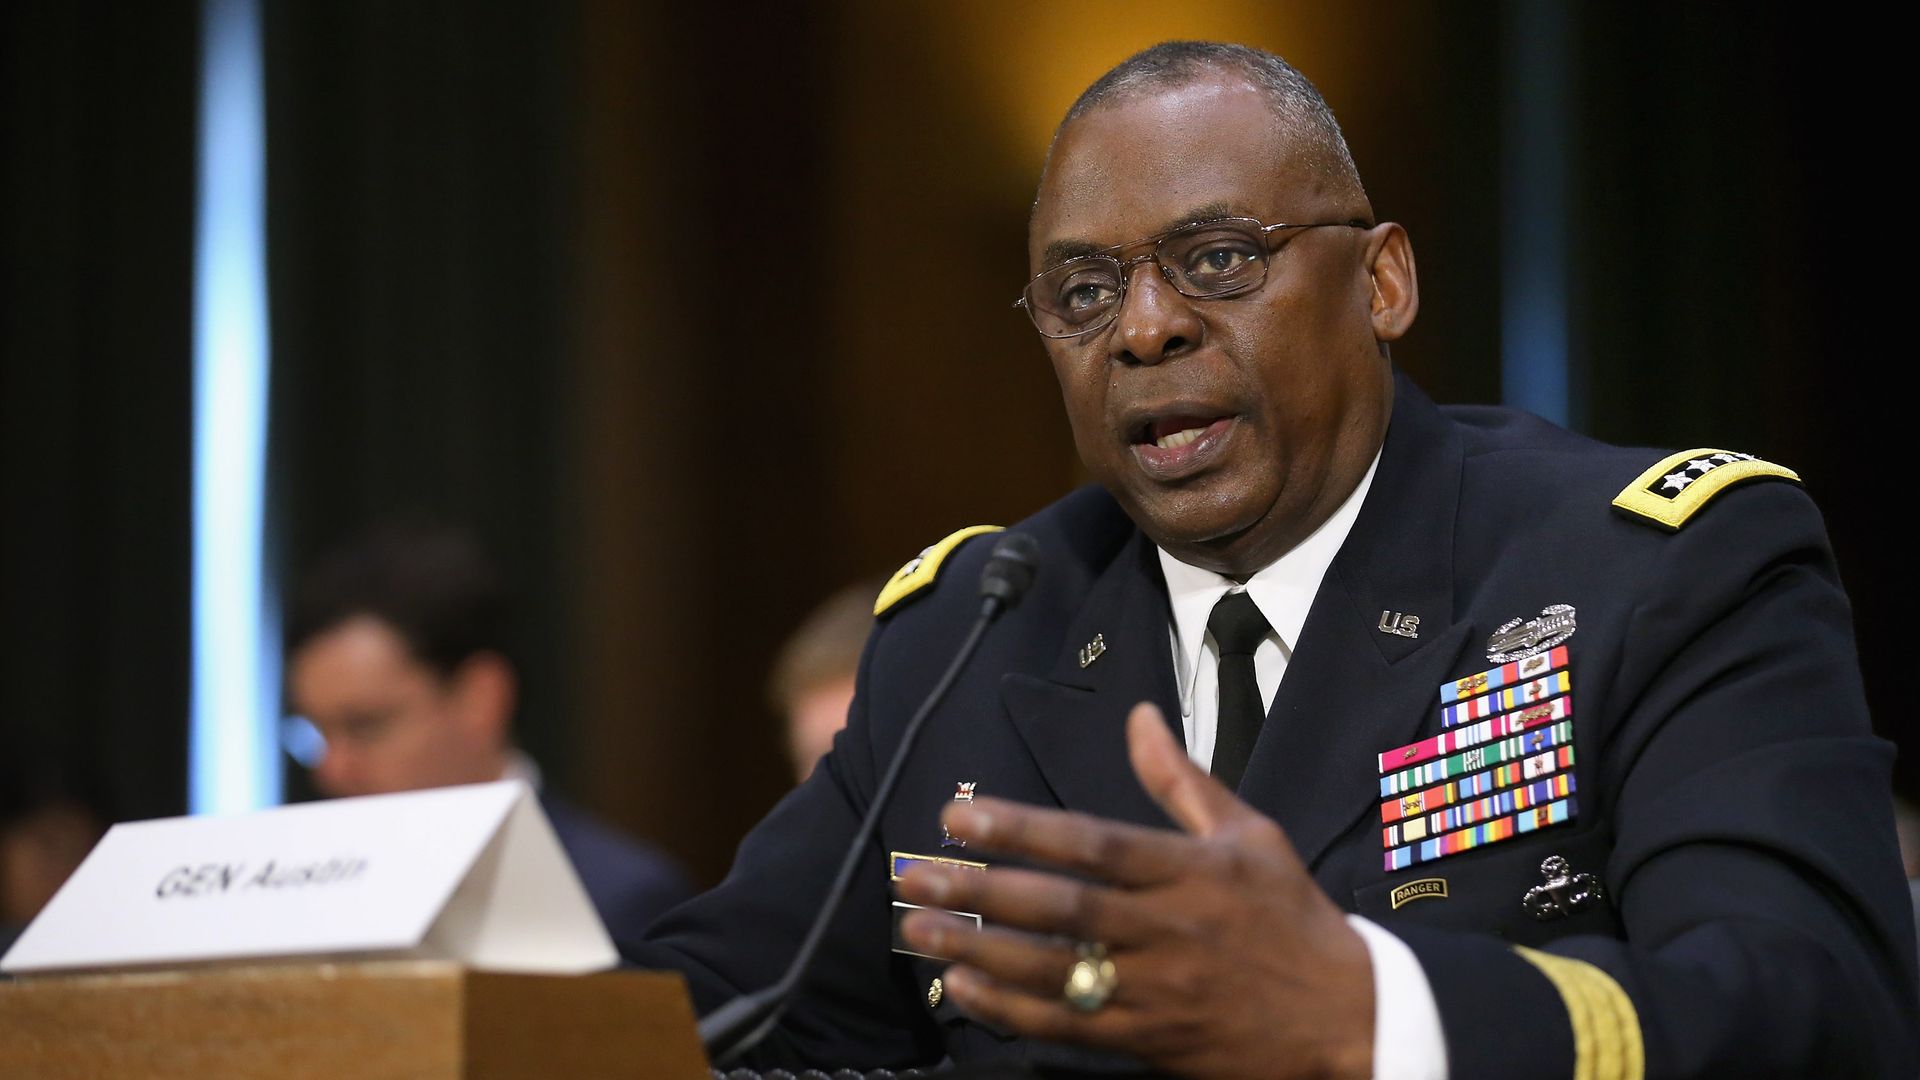 Gen. Lloyd Austin III, commander of U.S. Central Command, testifies before the Senate Armed Services Committee about ongoing U.S. military operations. Photo: Chip Somodevilla/Getty Images